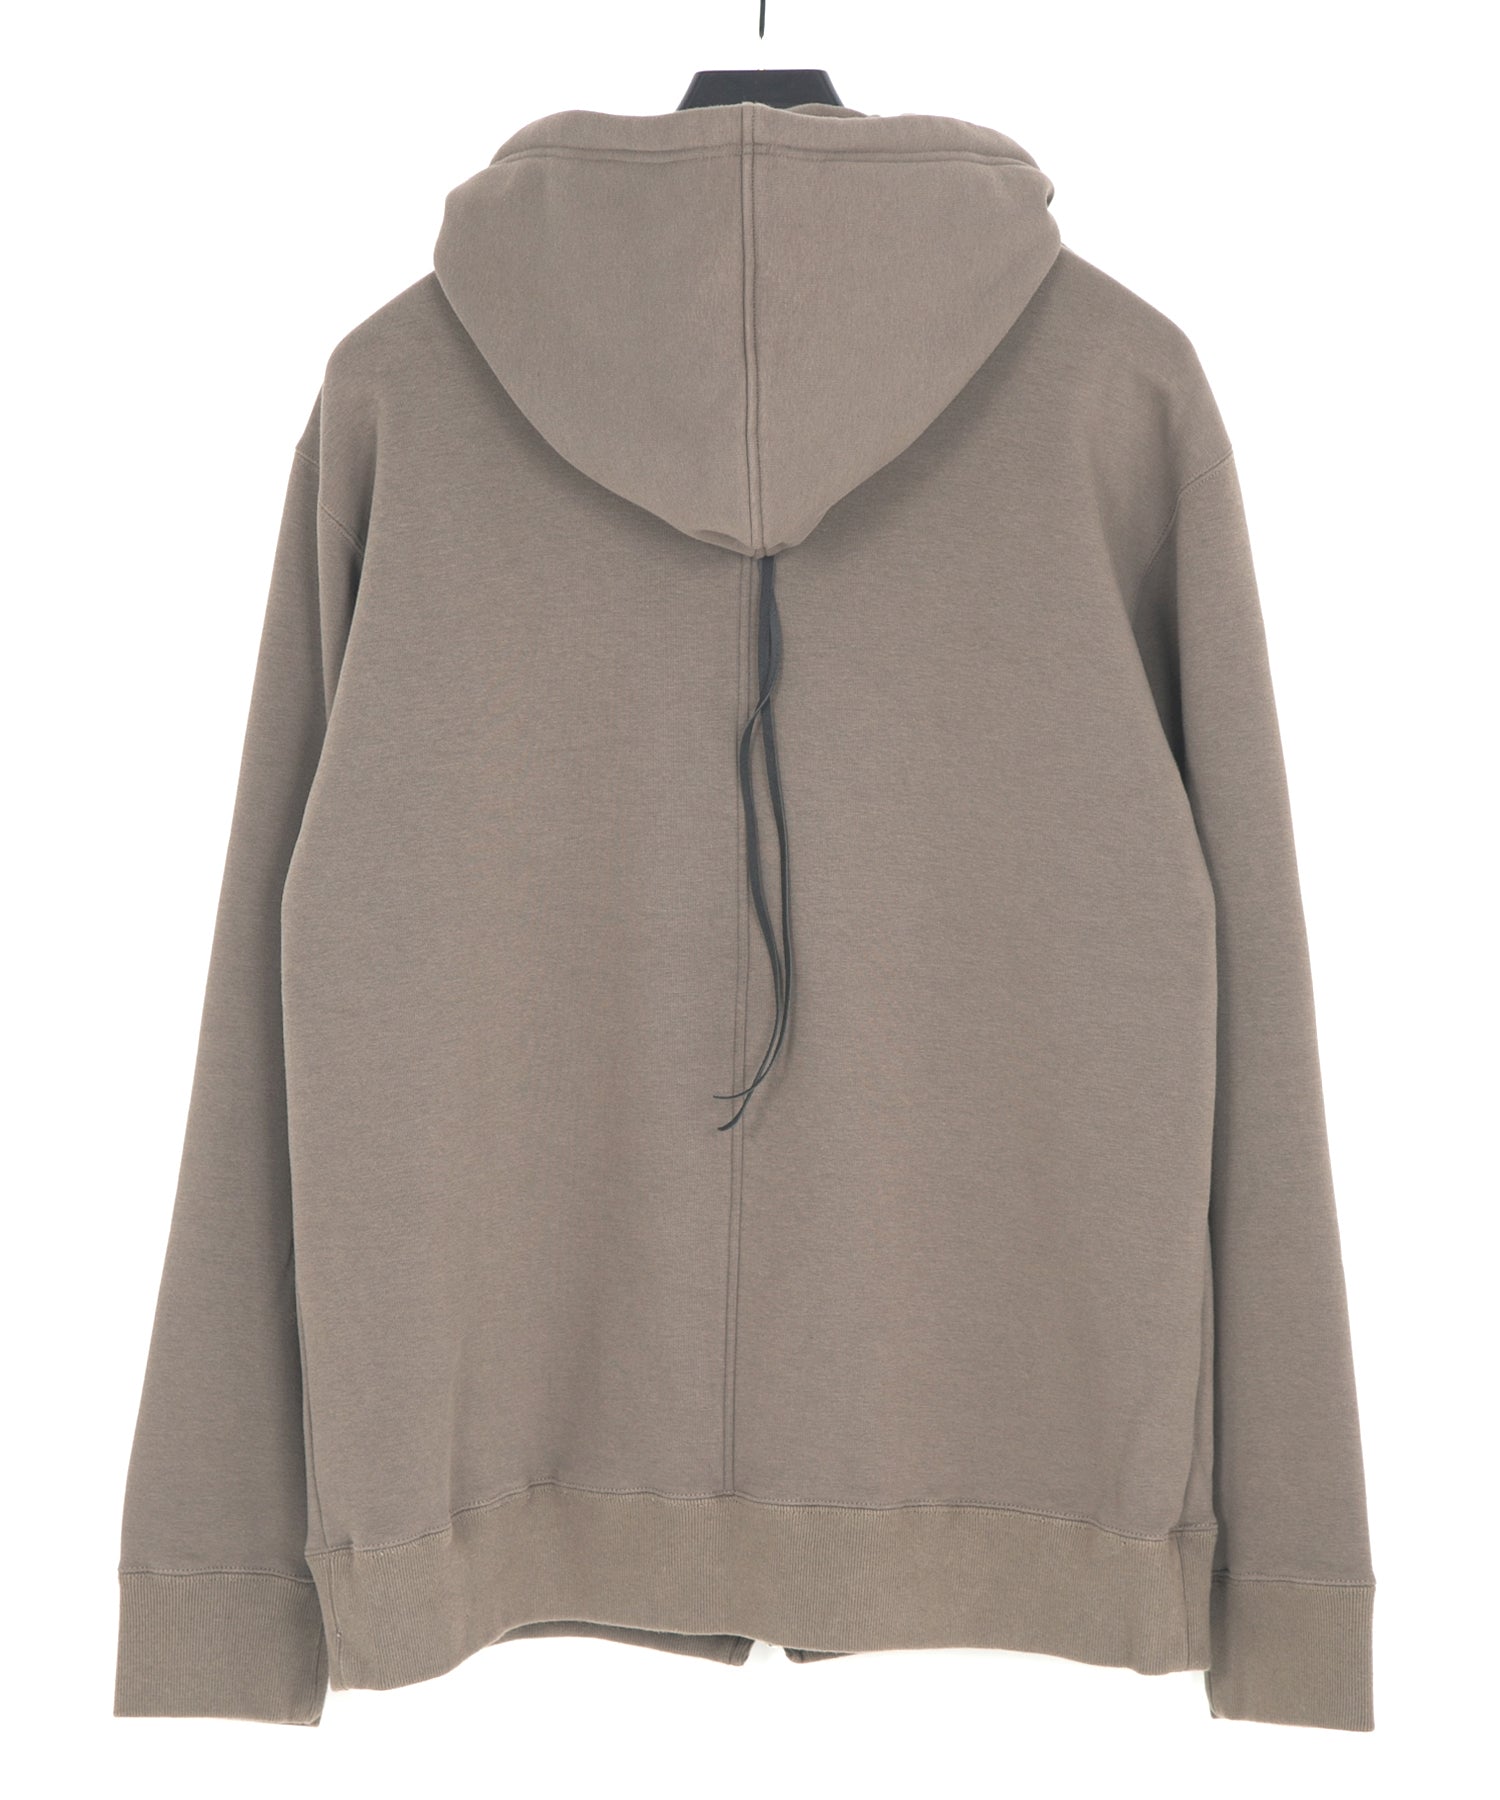 Stretch Cotton Polyester Knit Backside Velor finish Zip up Hoodie